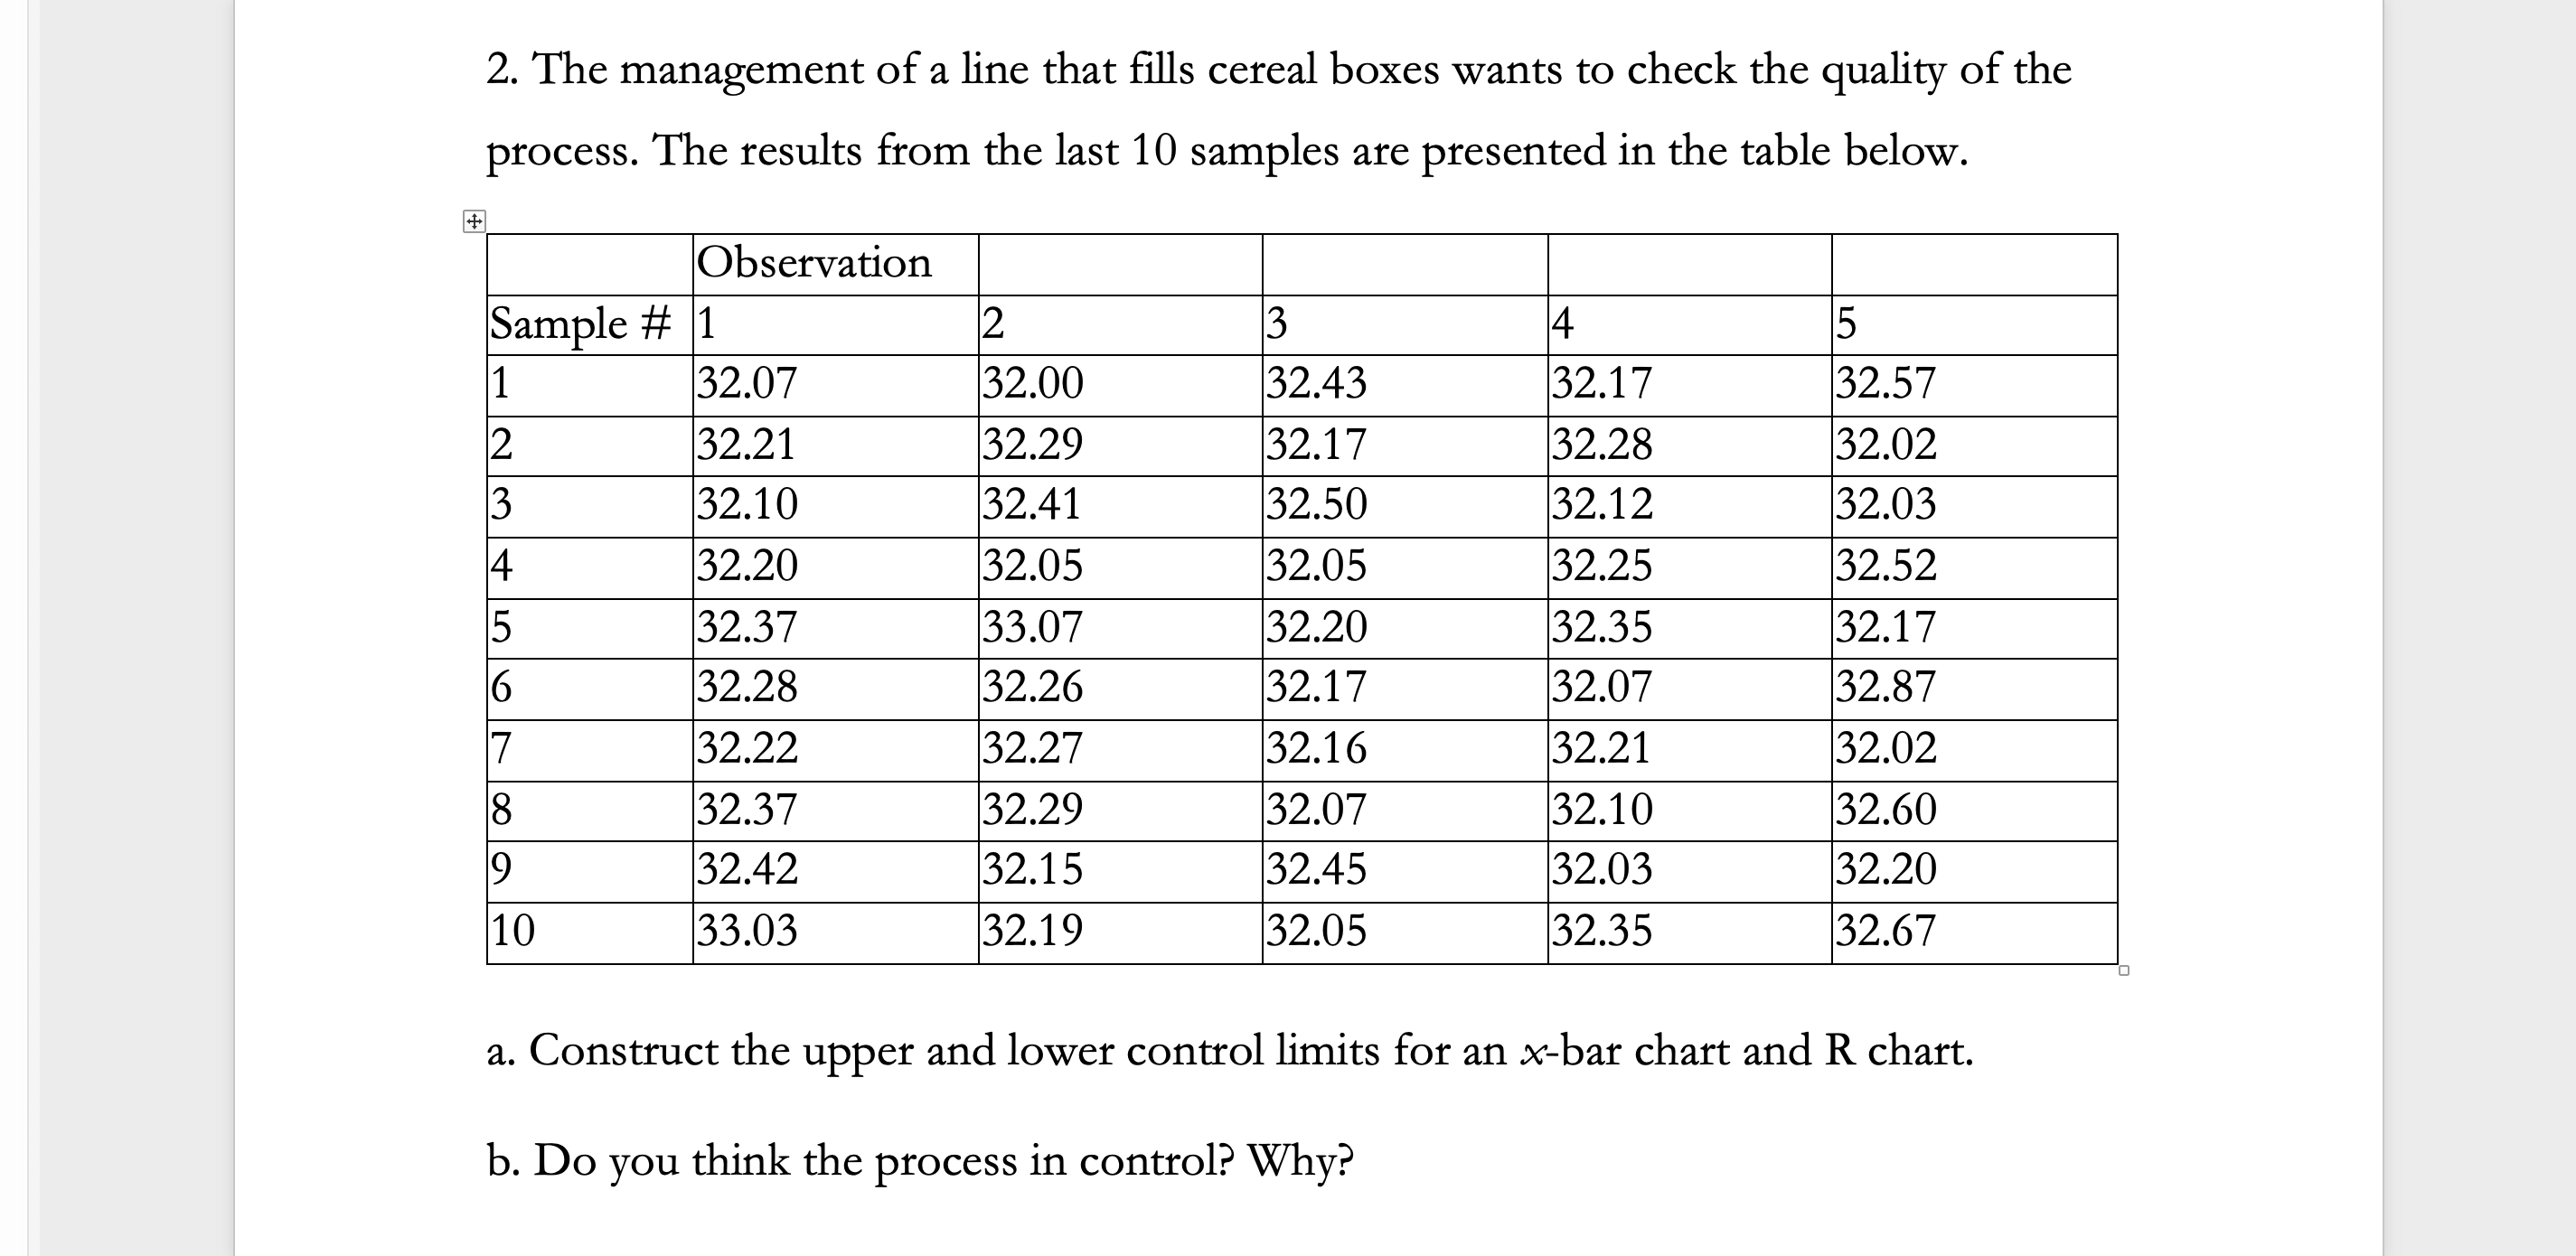 + 2. The management of a line that fills cereal boxes wants to check the quality of the process. The results